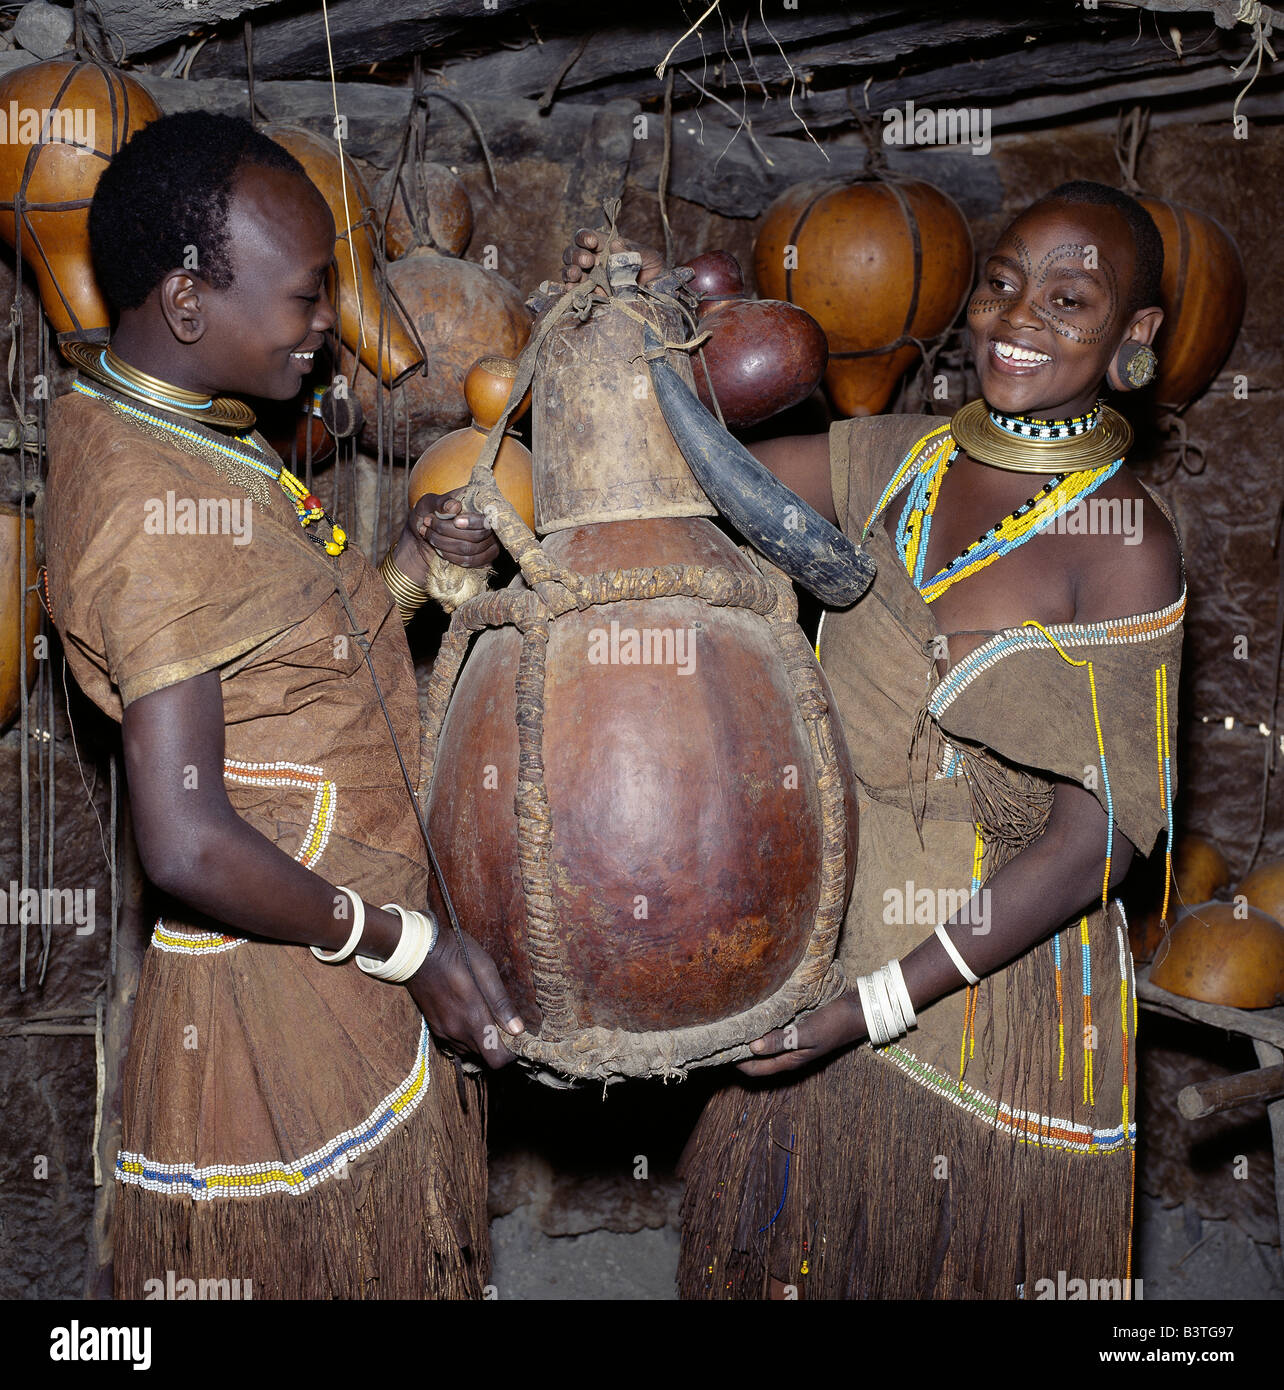 Tanzania, Ngorongoro Highlands, Eyasi escarpment. Two Datoga women carry from their home a large gourd, which will be used for f Stock Photo